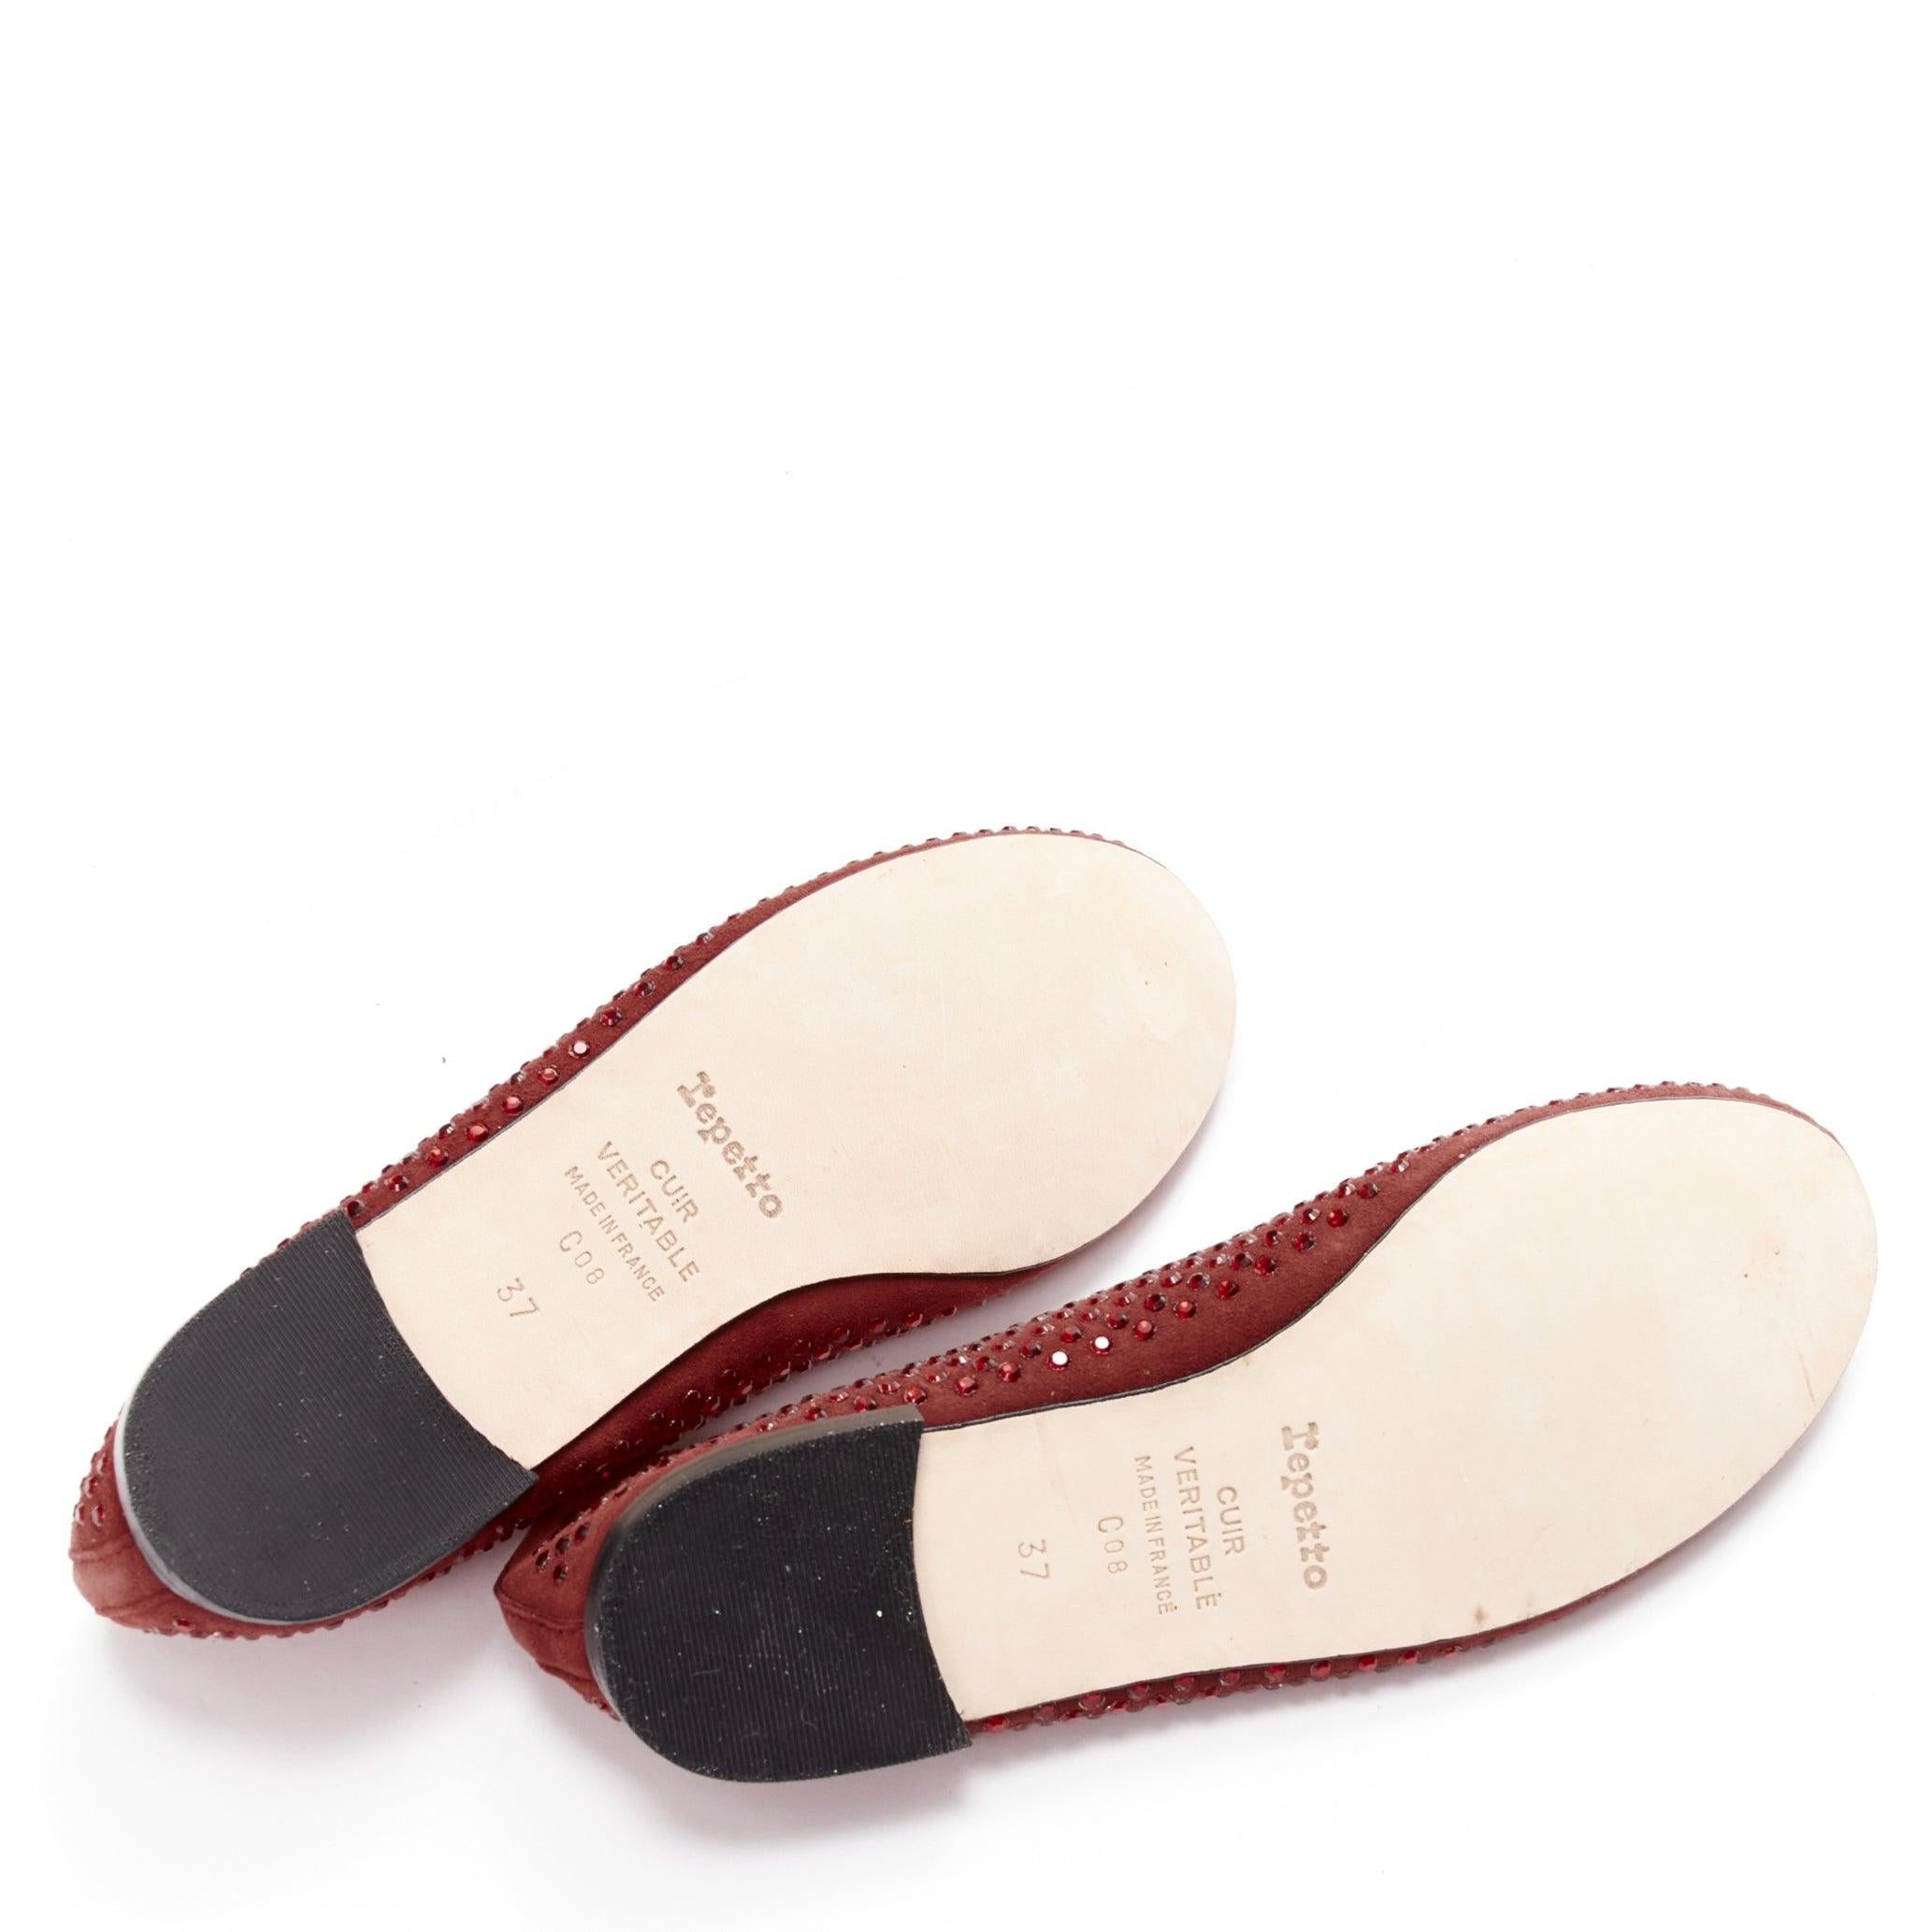 REPETTO 60 Anniversary Limited Edition red crystal suede ballet flats EU37 For Sale 6